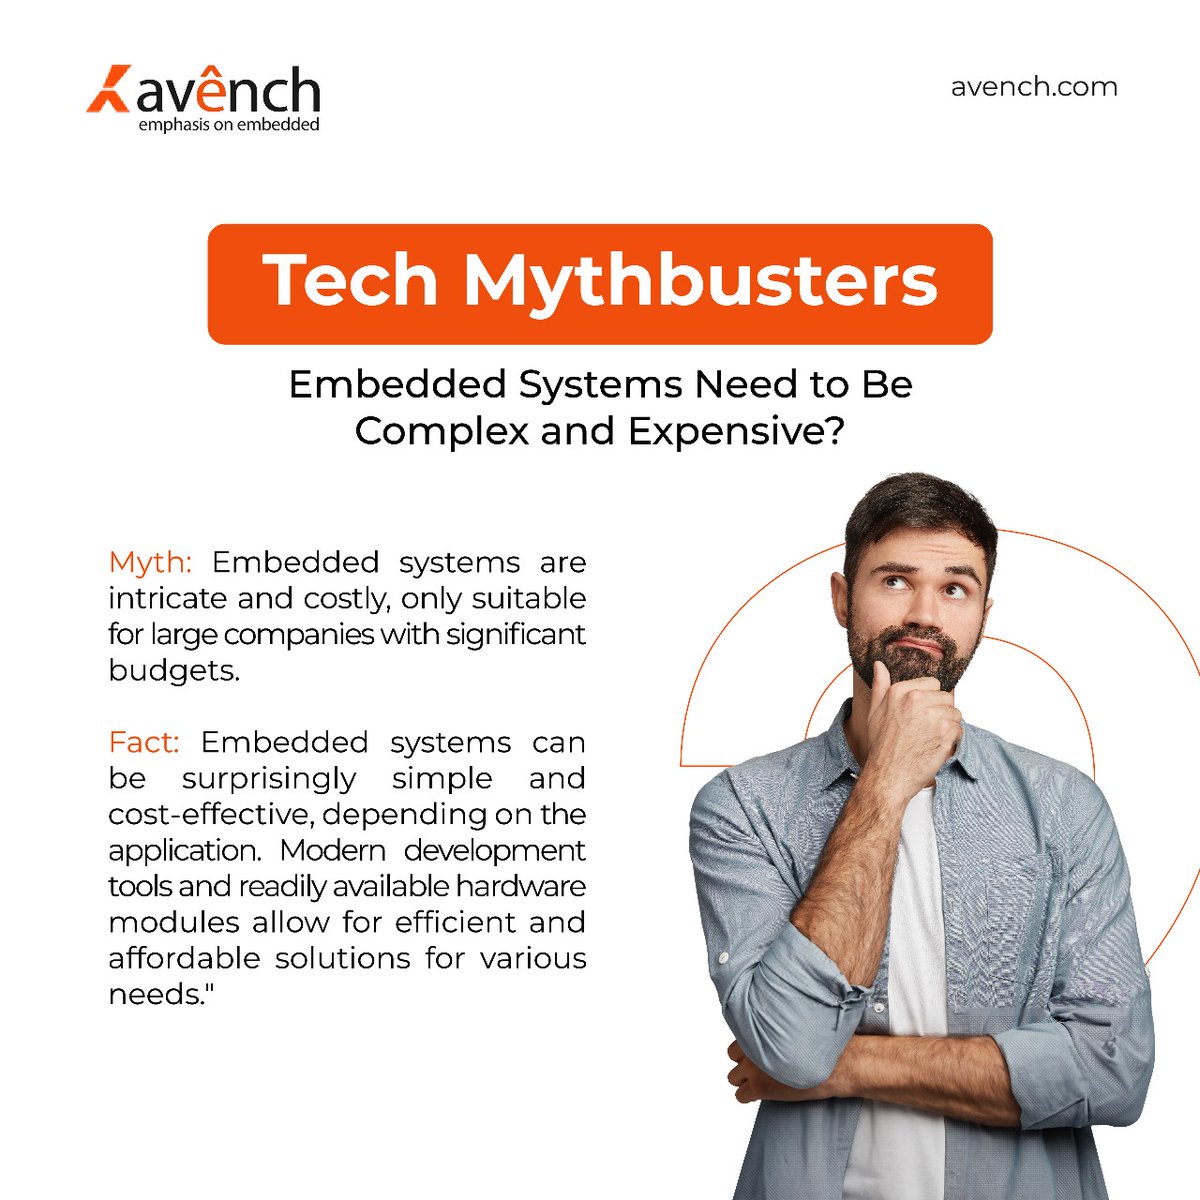 Avench optimizes embedded systems: scalable, energy-efficient, reliable. Transform your business affordably. Contact us! avench.com #avenchsystem #embeddedsystems #IOTsystem #microcontrollers #TechnologyStrategy #TechConsultancy #EmbeddedSystems #TechVision